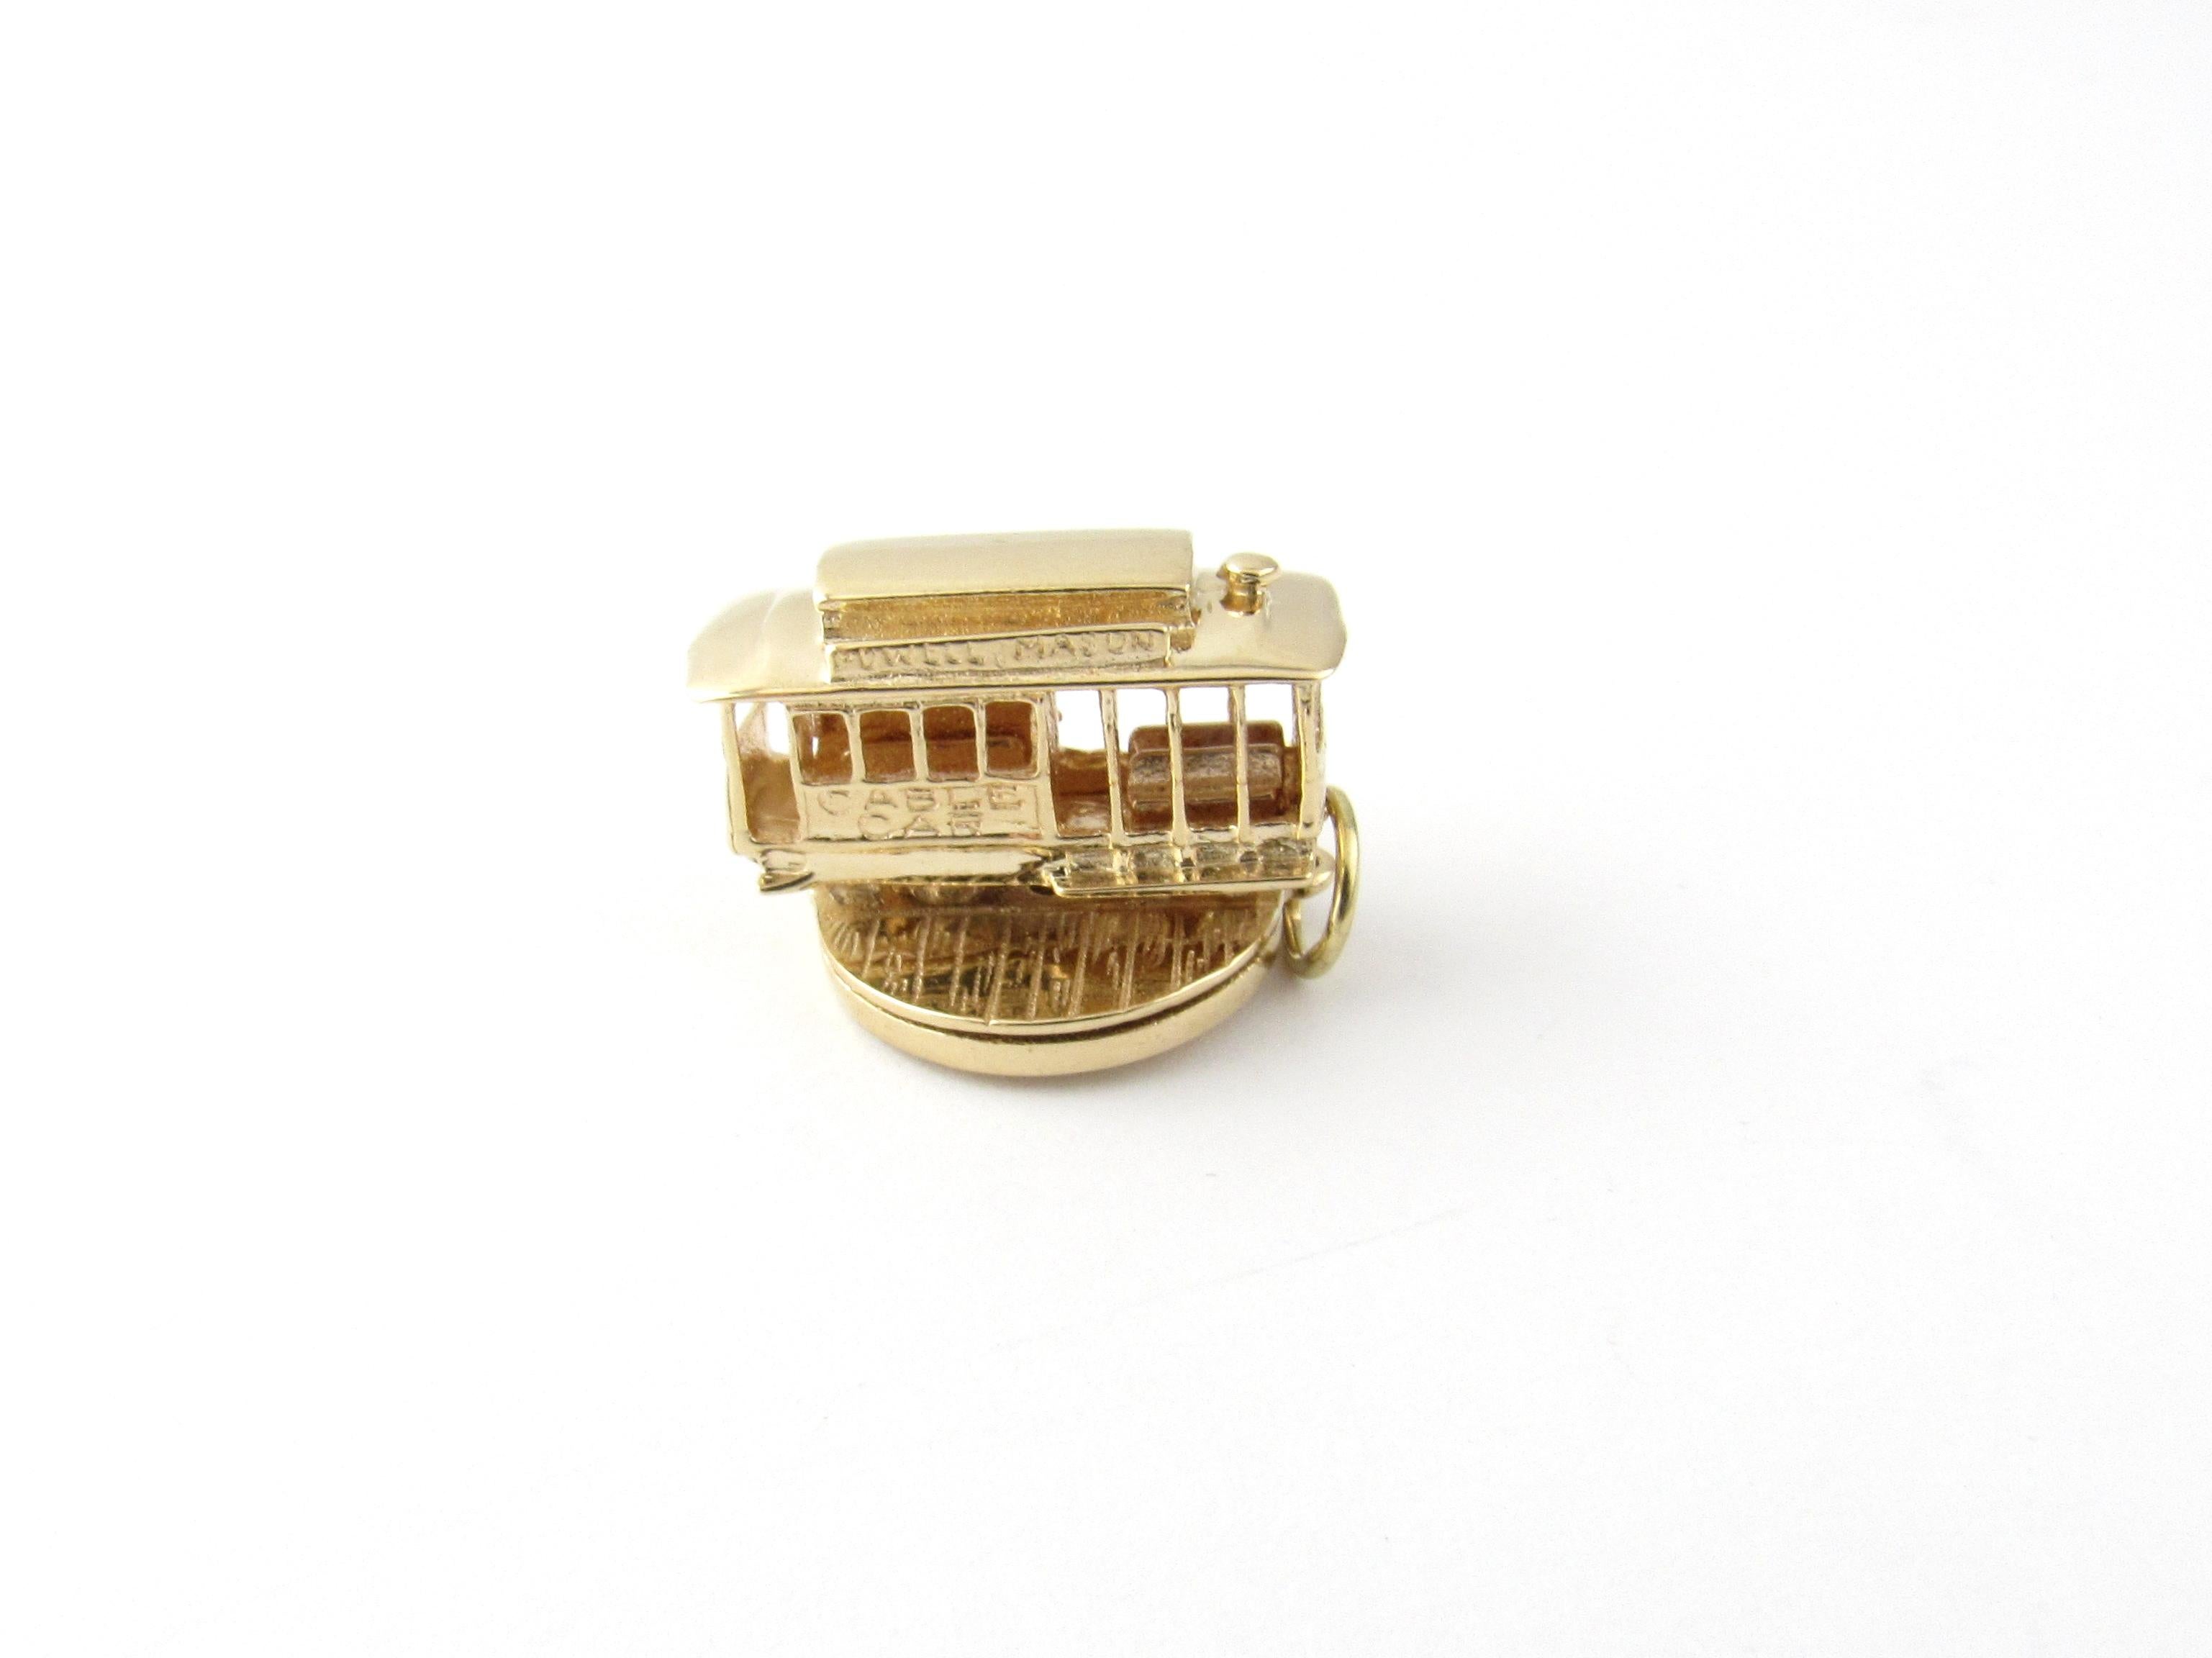 Vintage 14 Karat Yellow Gold San Francisco Cable Car Charm

Take a ride on the trolley!

This lovely 3D charm features a miniature cable car that spins on its round base. Bottom of charm reads 